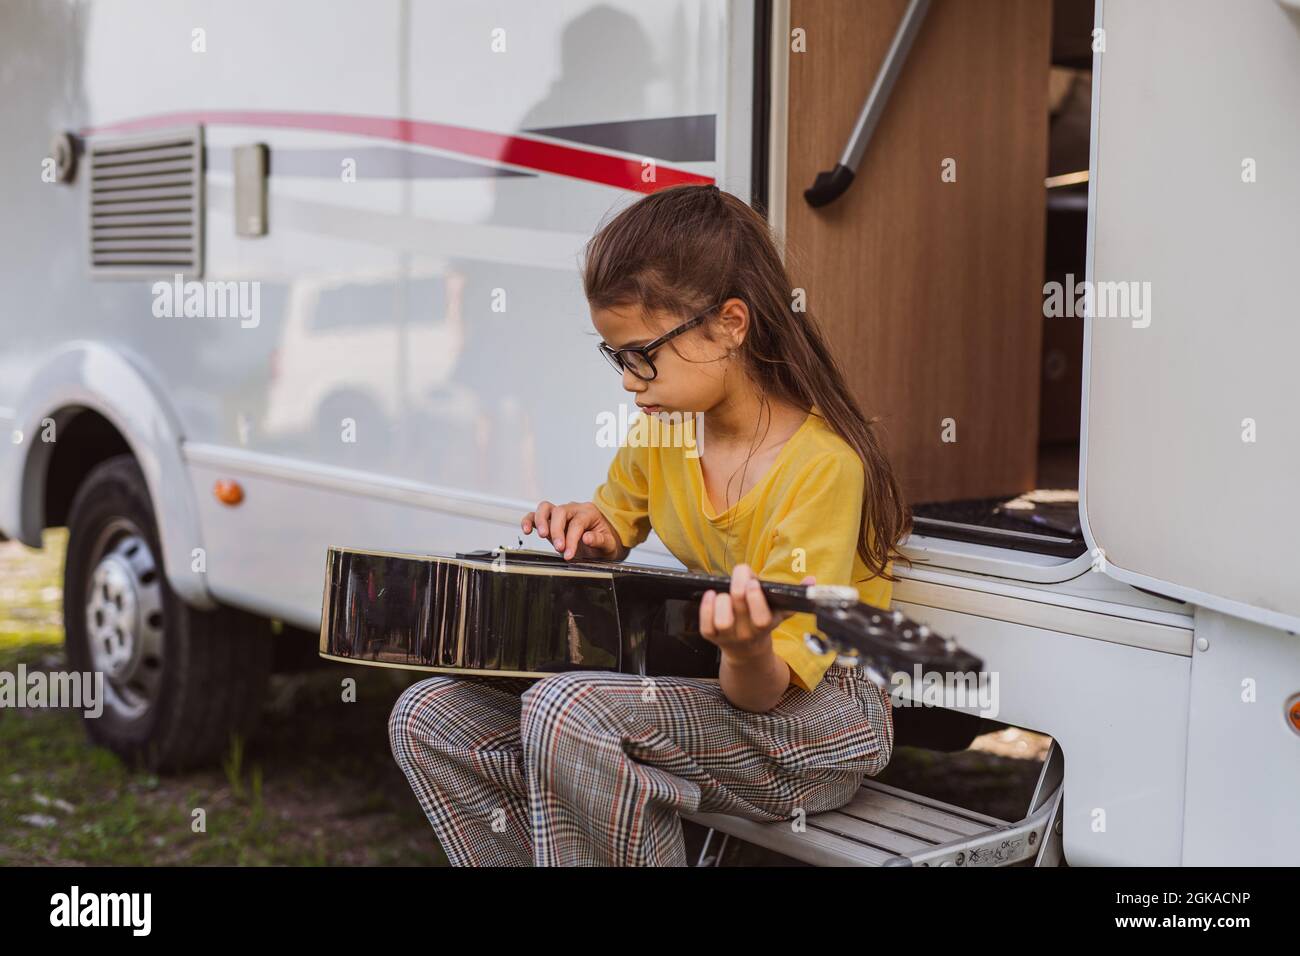 Small girl with guitar playing by caravan, family holiday trip. Stock Photo